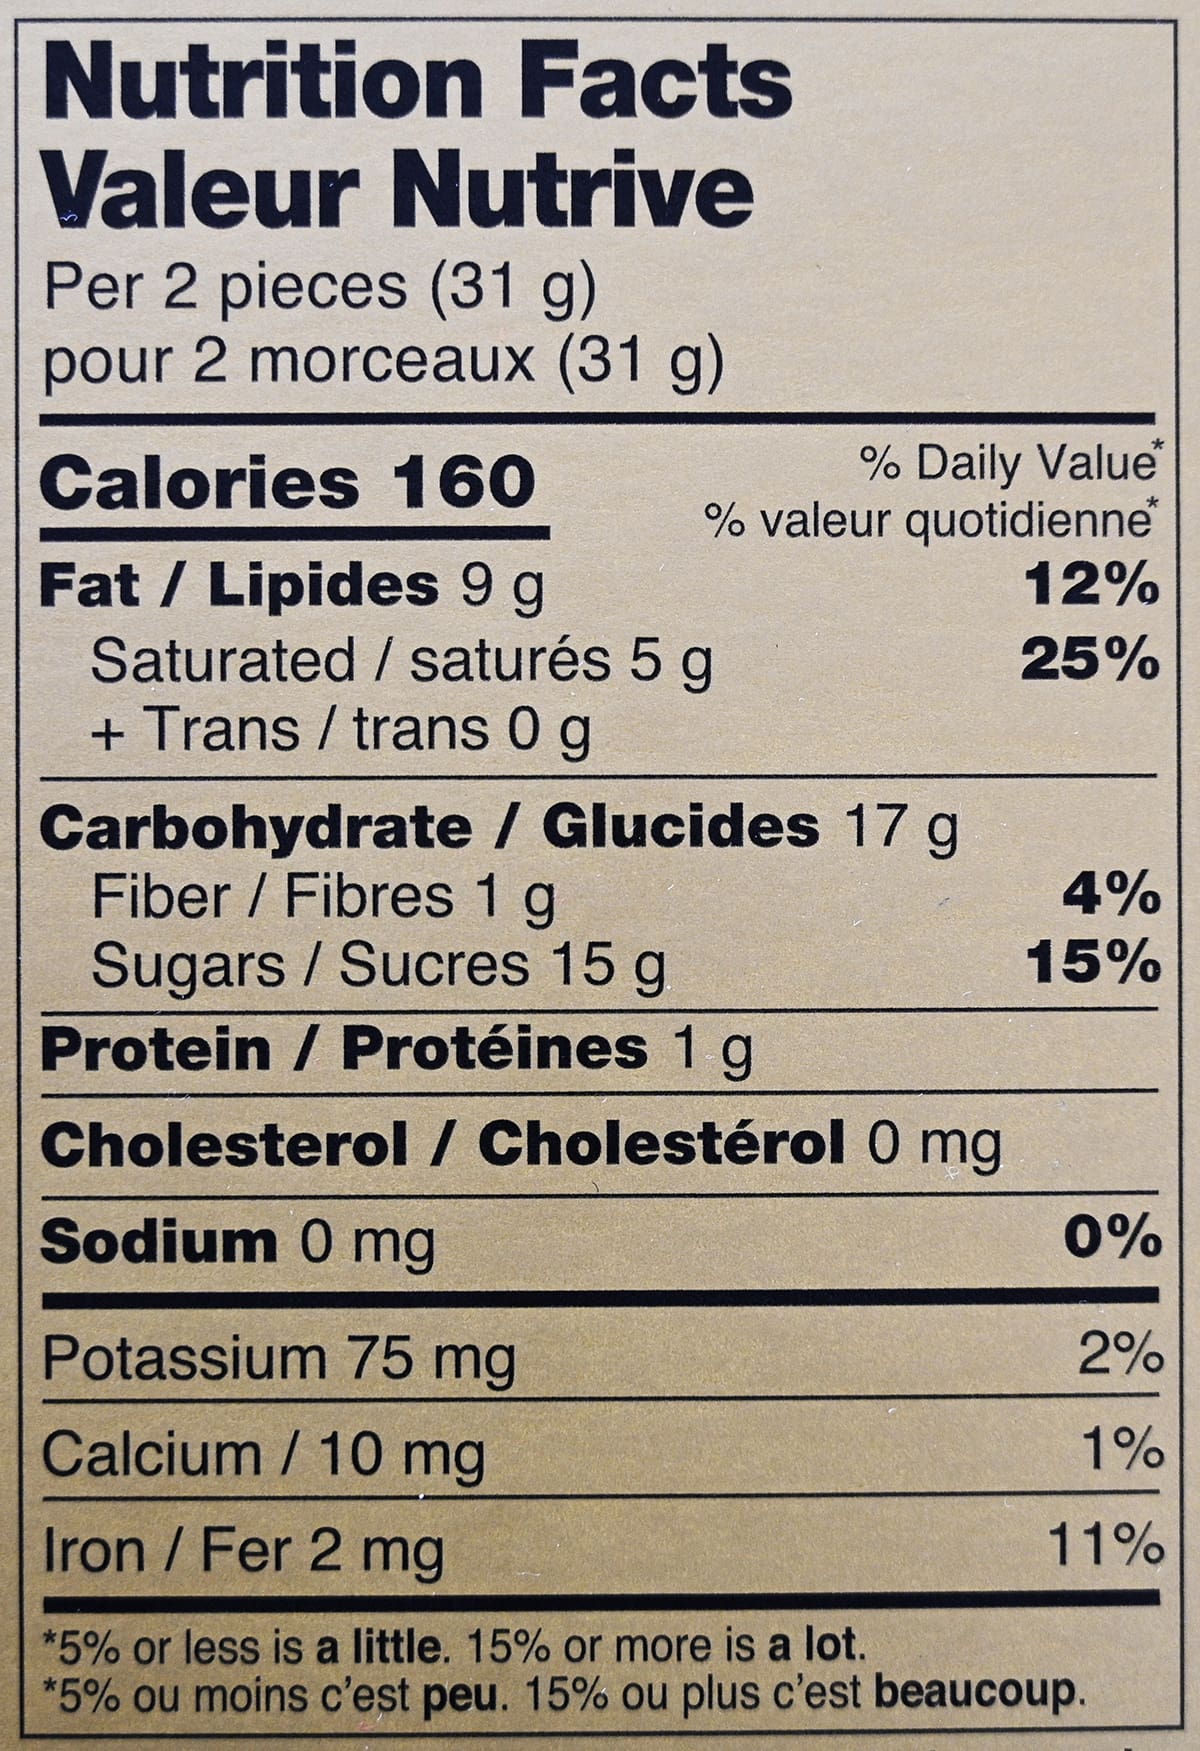 Image of the nutriton facts for the chocolates from the back of the box.